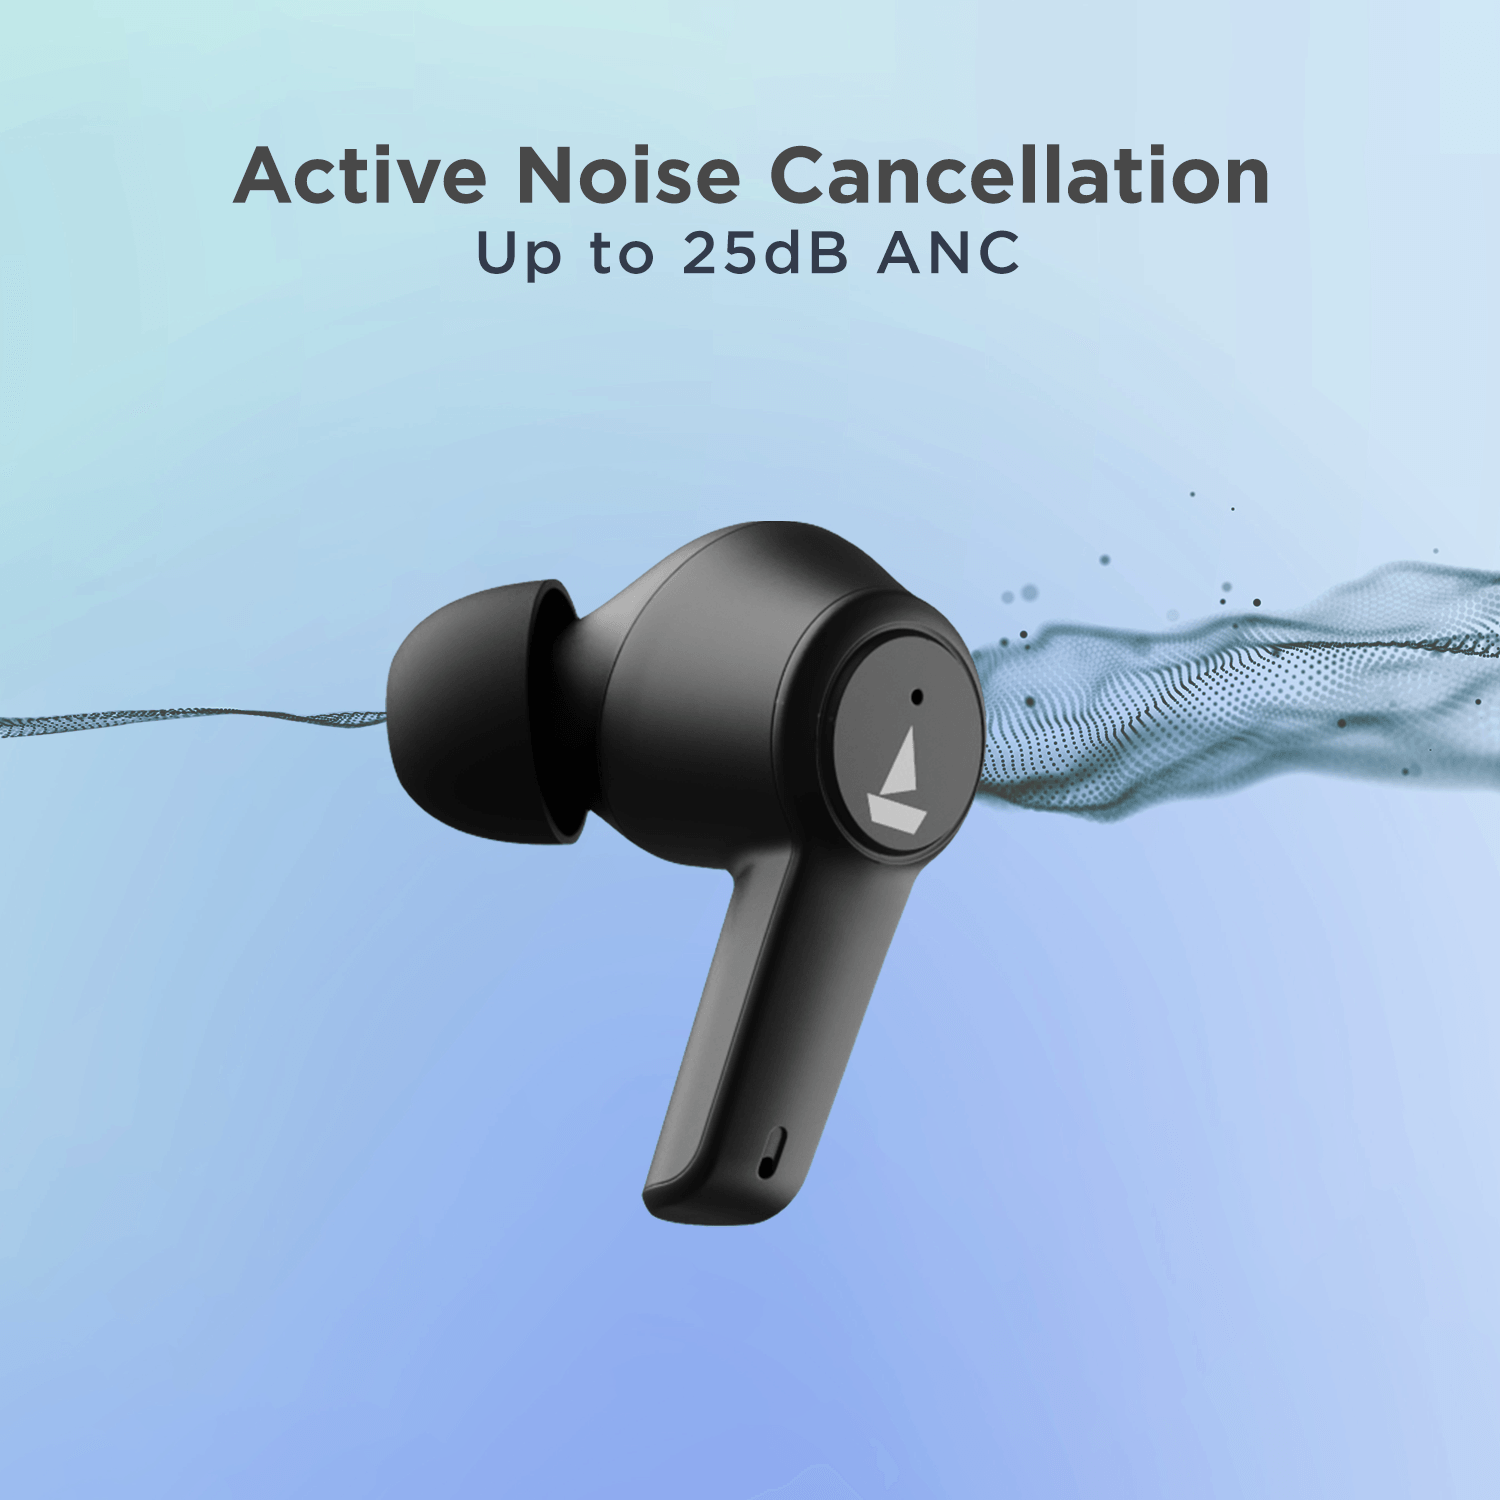 Airdopes 411 ANC - Best Noise-Cancelling earbuds